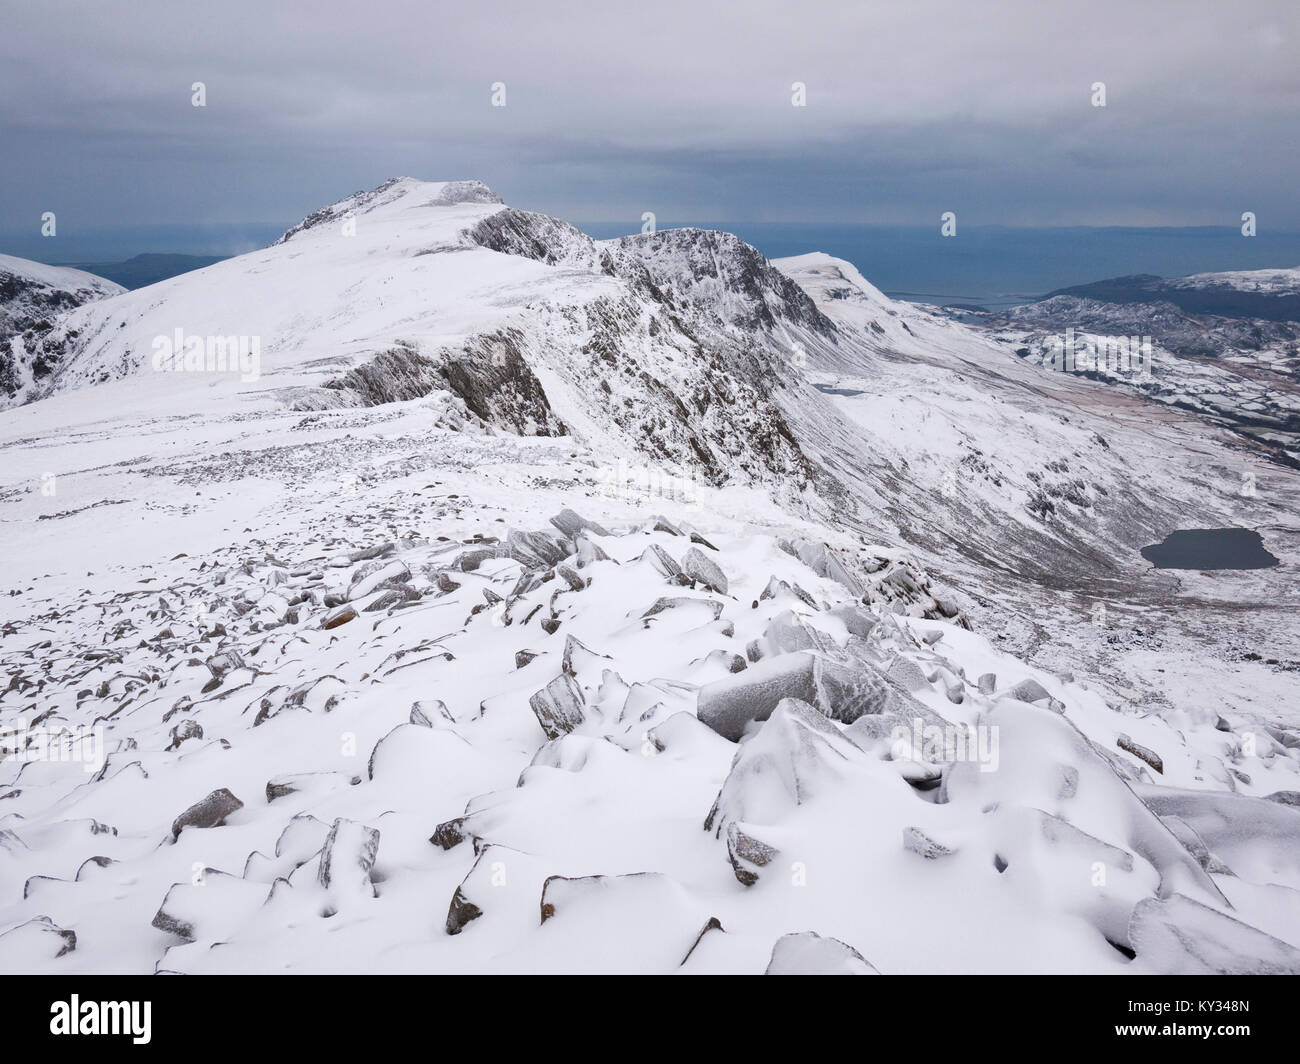 View to Penygadair, the summit of Cadair Idris, from Mynydd Moel under winter conditions. Snowdonia National Park, North Wales. Stock Photo